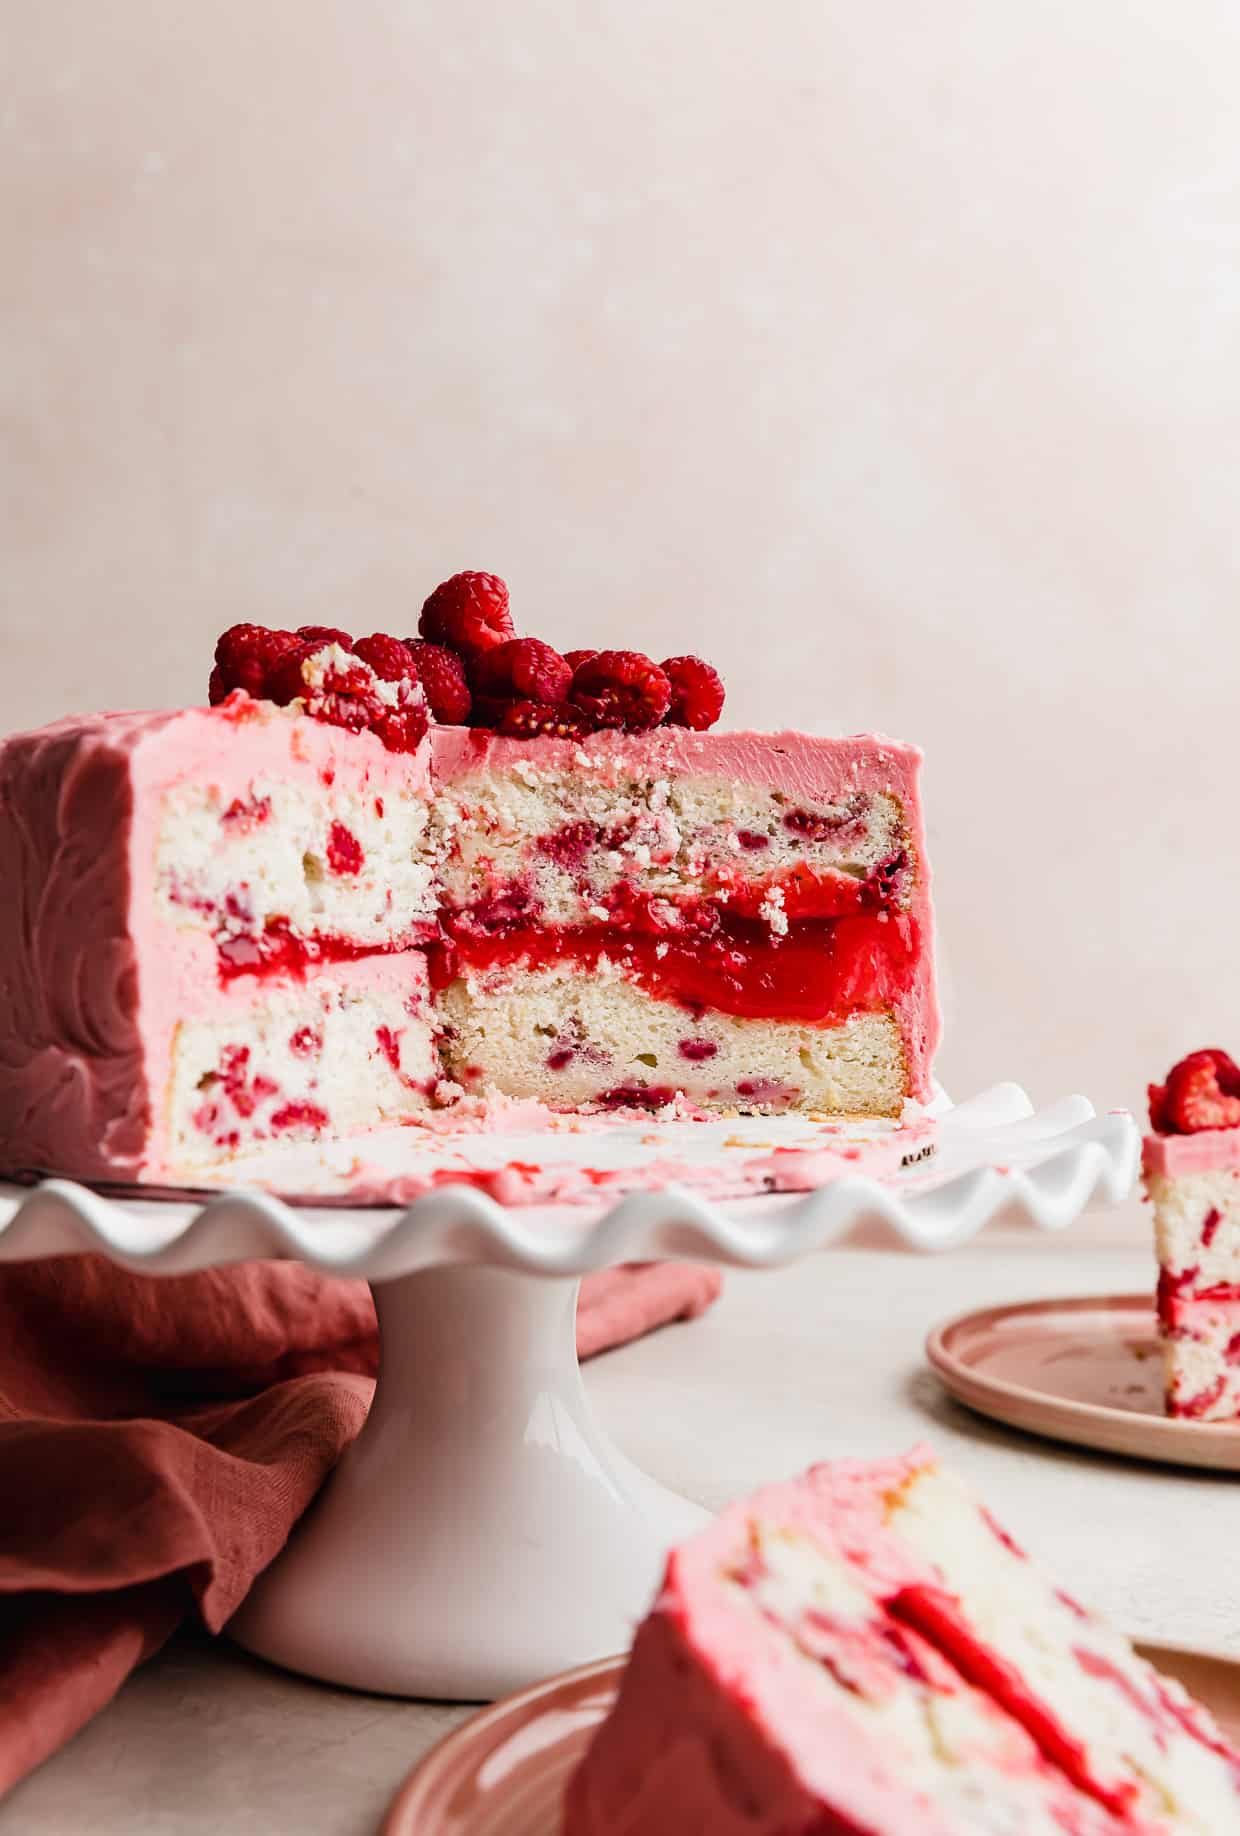 A two layer Lemon Raspberry Cake on a white cake stand with a slice of cake removed showing the raspberry filling between each layer.